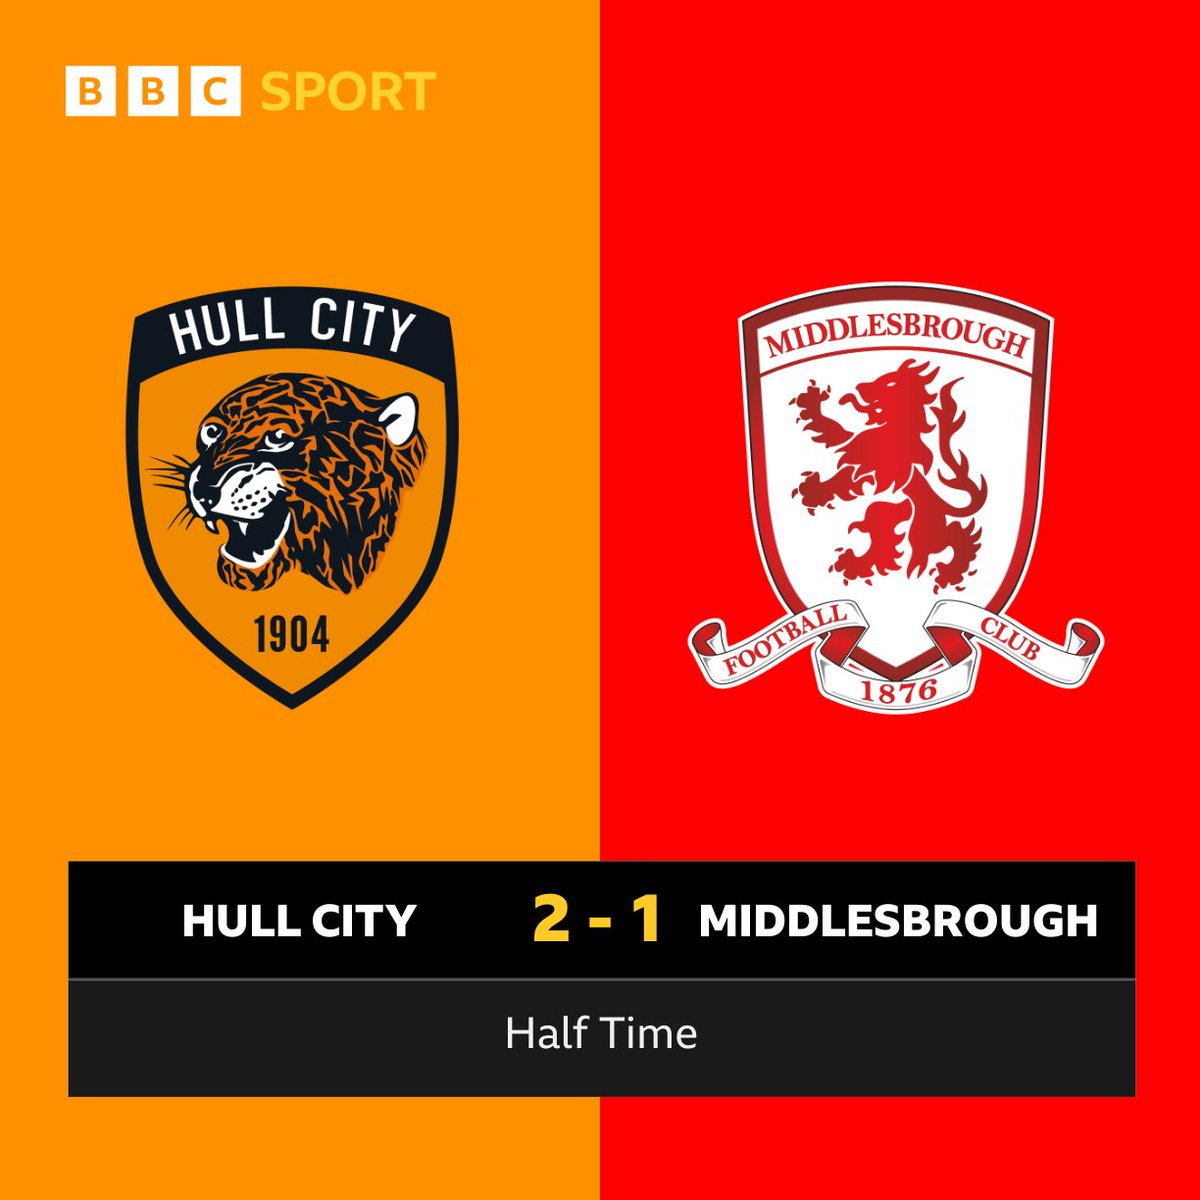 ⚽ HALF TIME ⚽ 🎙 Hear second-half commentary on @RadioHumberside 📻 All frequencies #hcafc | #BBCFootball